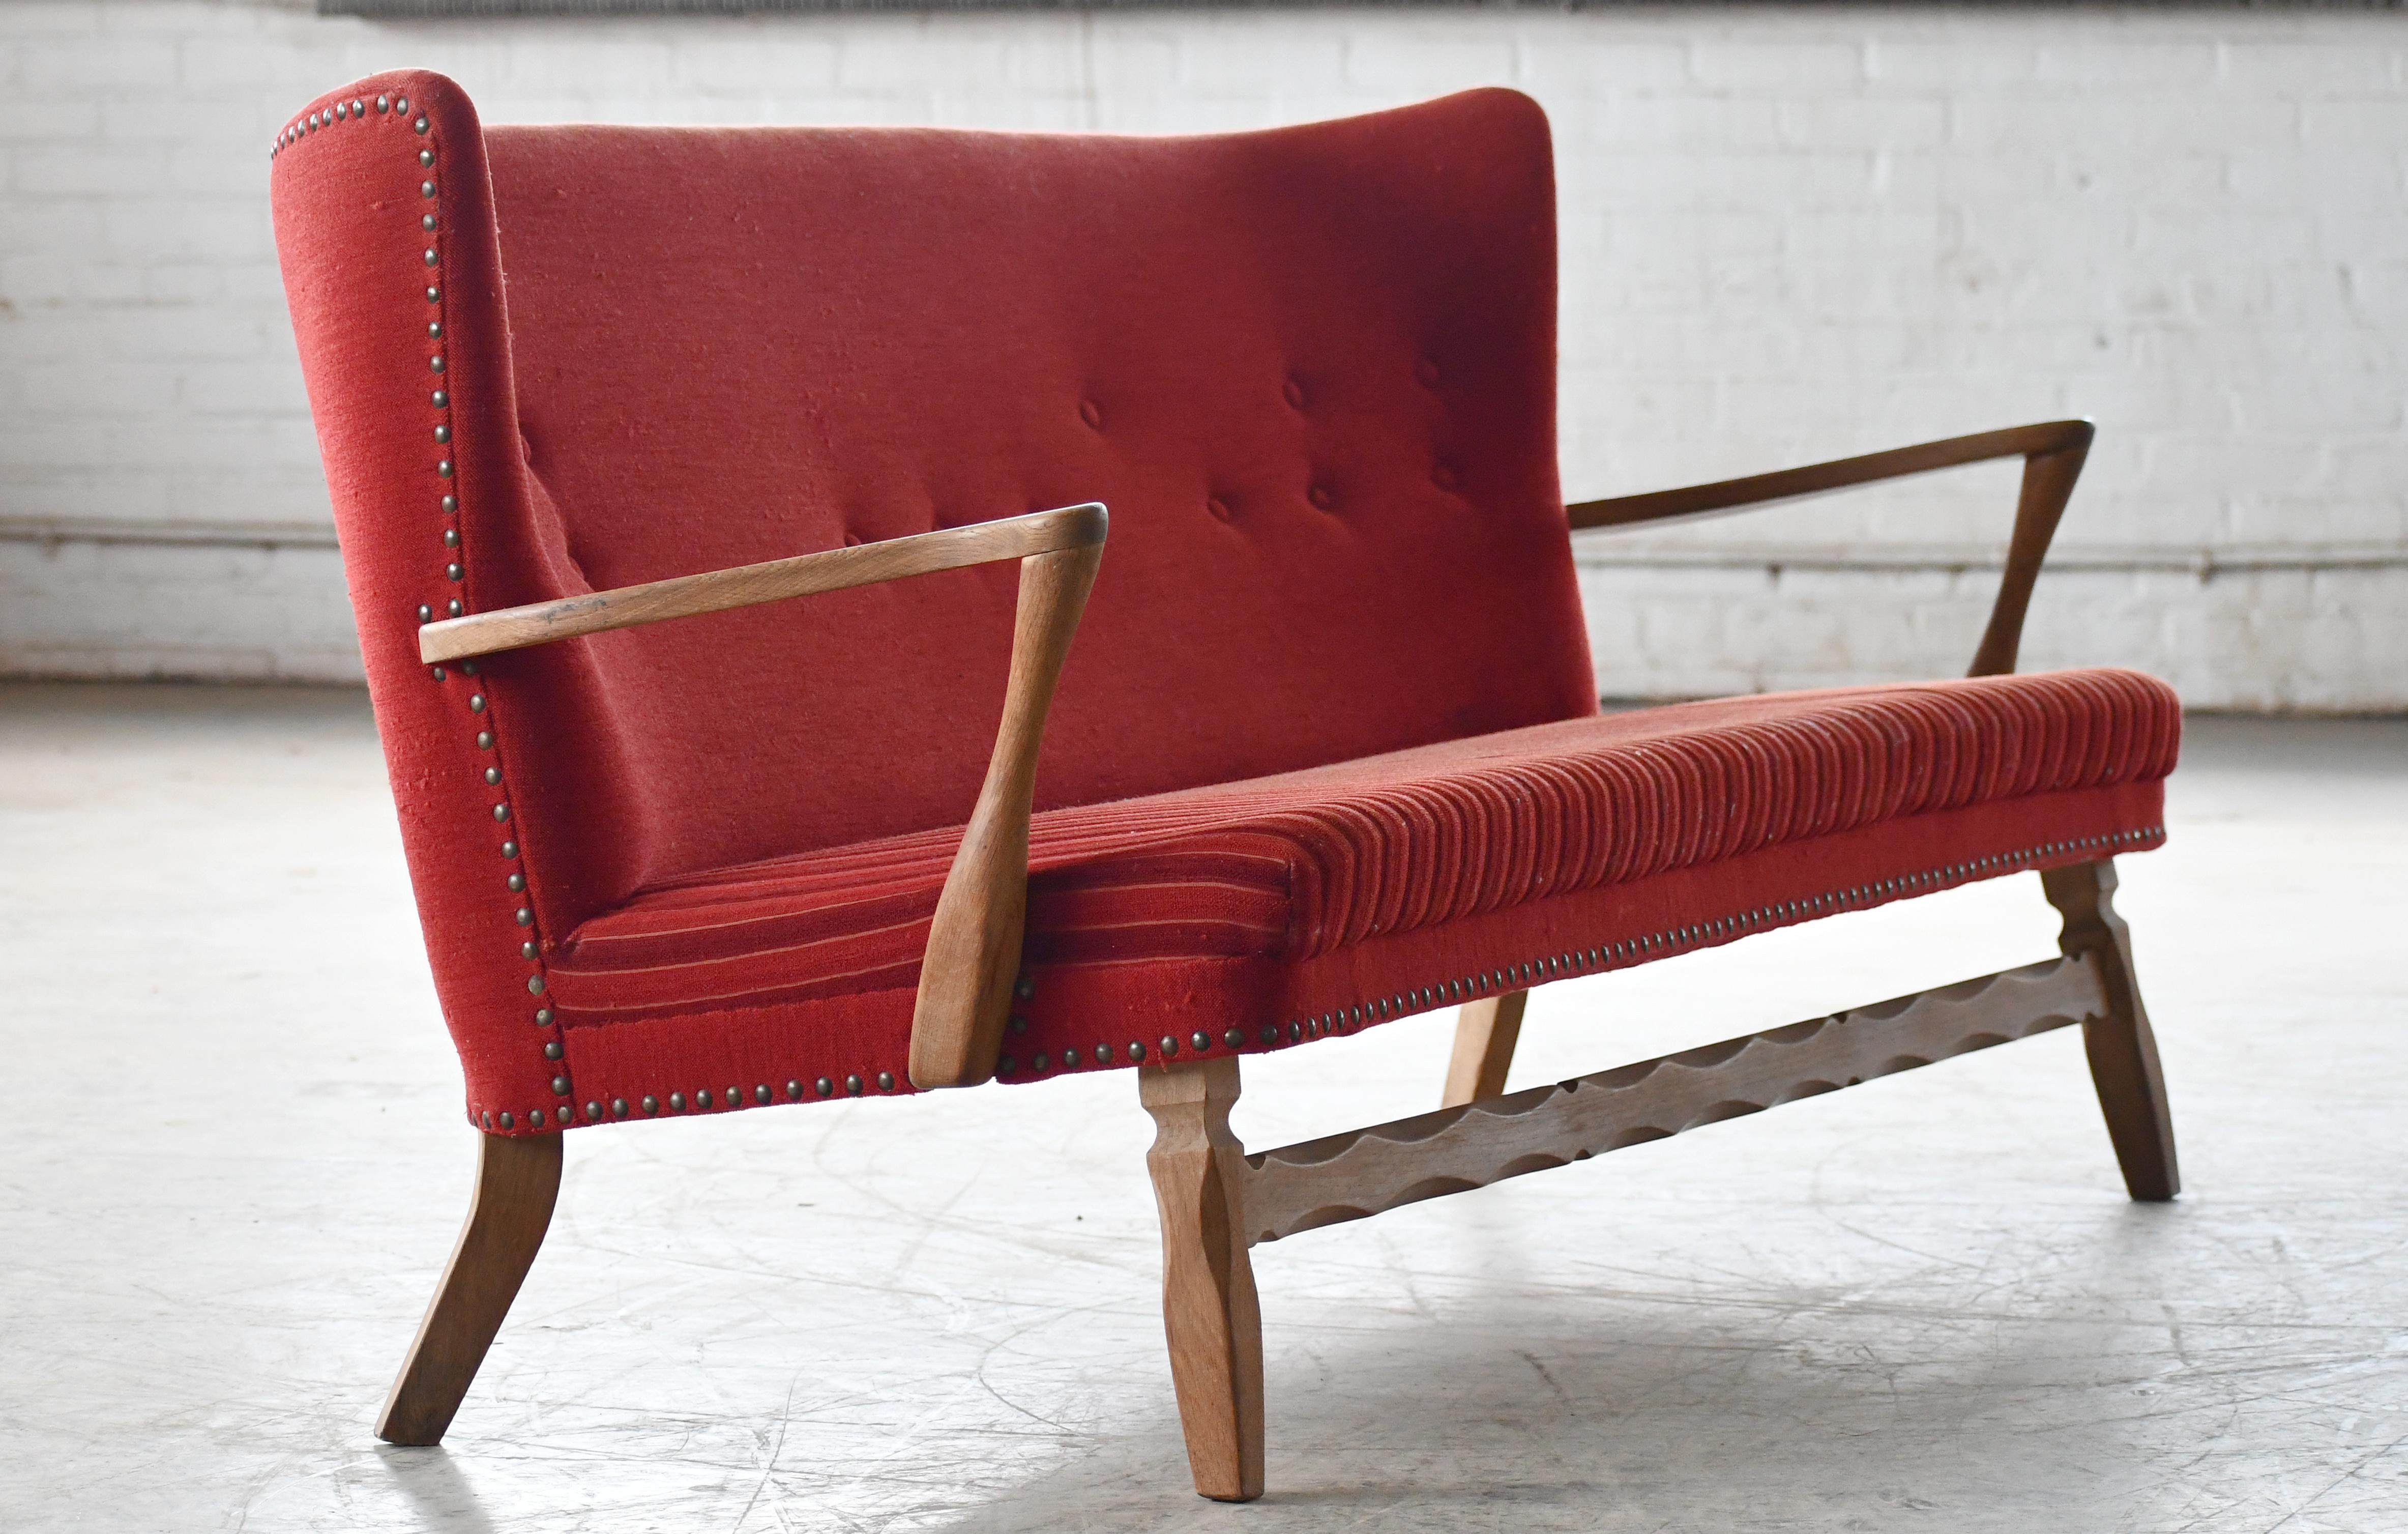 Fantastic 1950s Settee in red wool and beautifully carved oak base and open armrests. Very refined clean lines and an almost benchlike style to the settee. It's an unusual piece and hard to date but most likely made in the 1950s. Wool fabric is